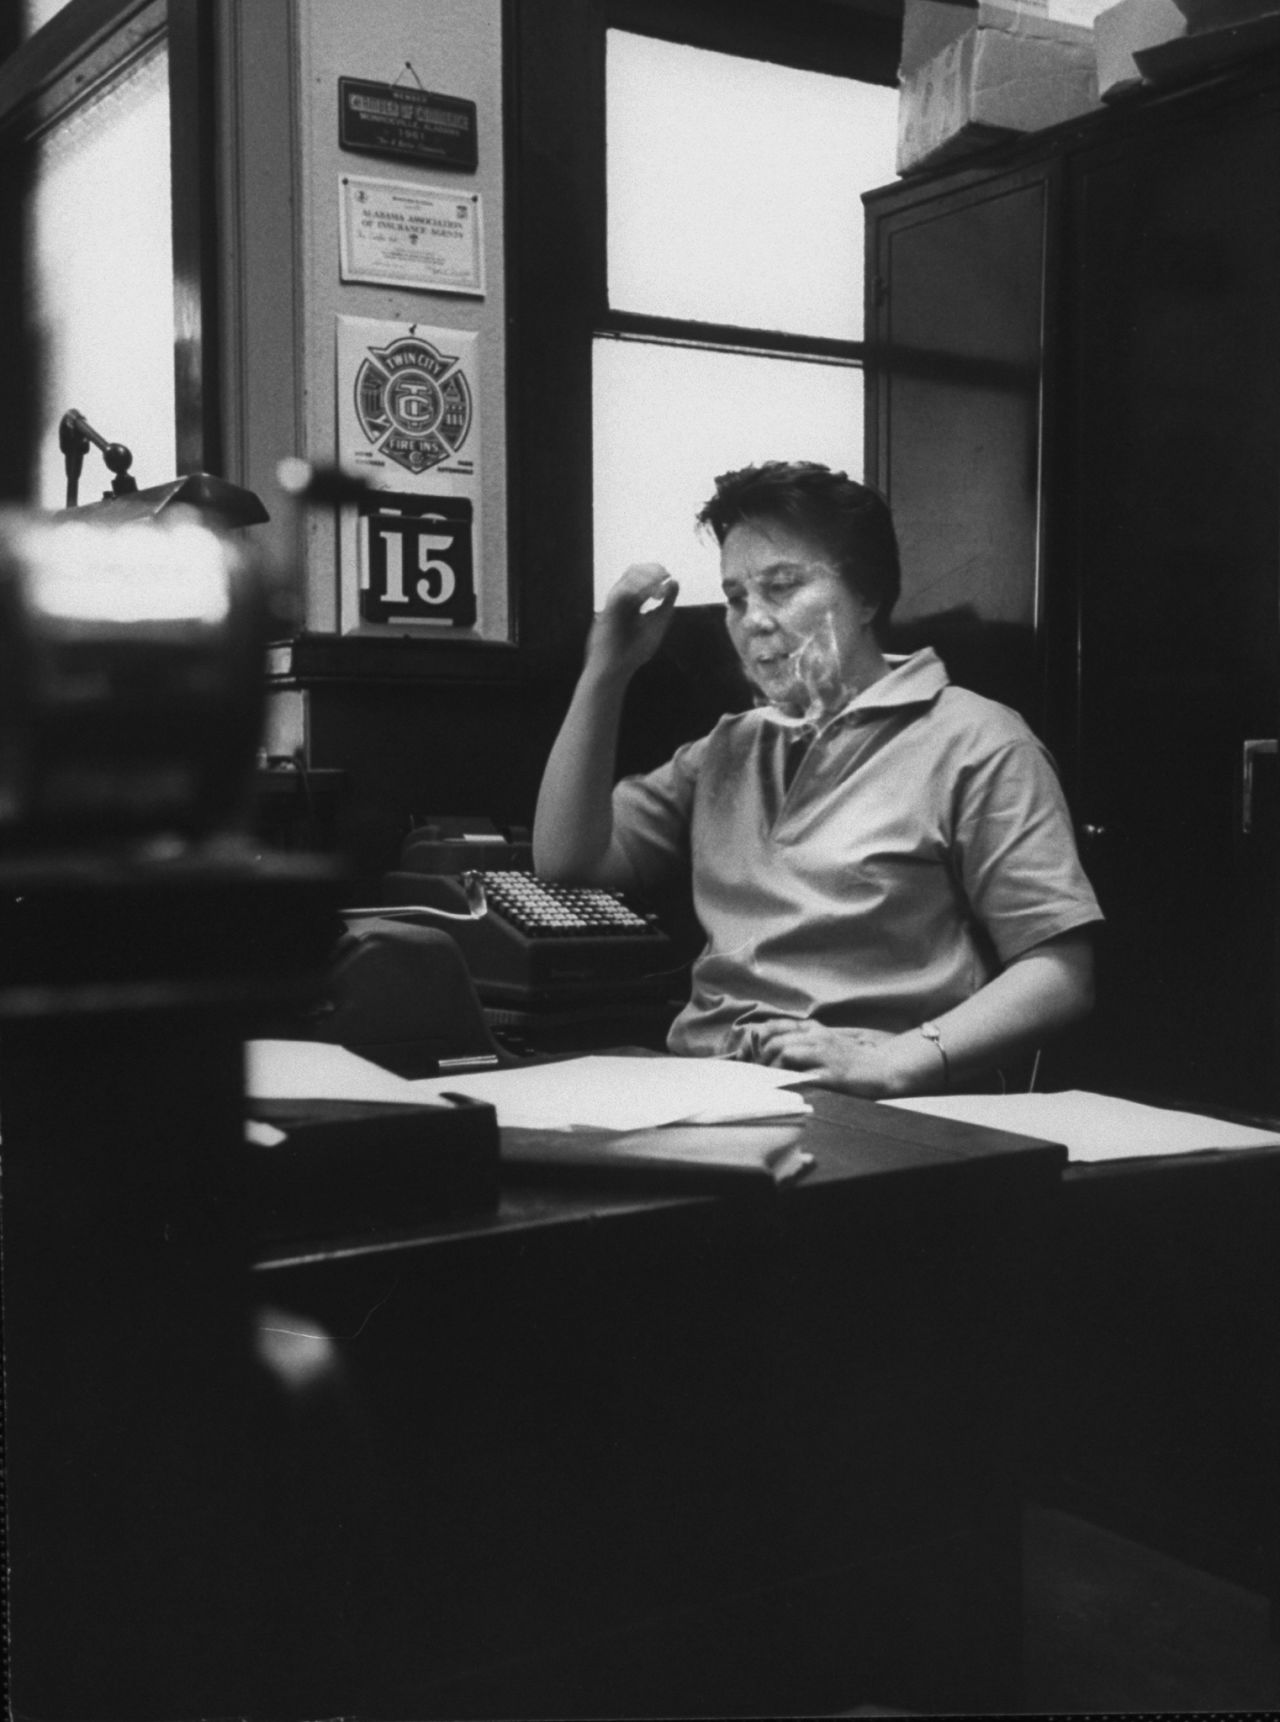 "To Kill a Mockingbird" author Harper Lee sits in her father's law office in this undated photo. News of her death was reported on Friday, February 19. She was 89.